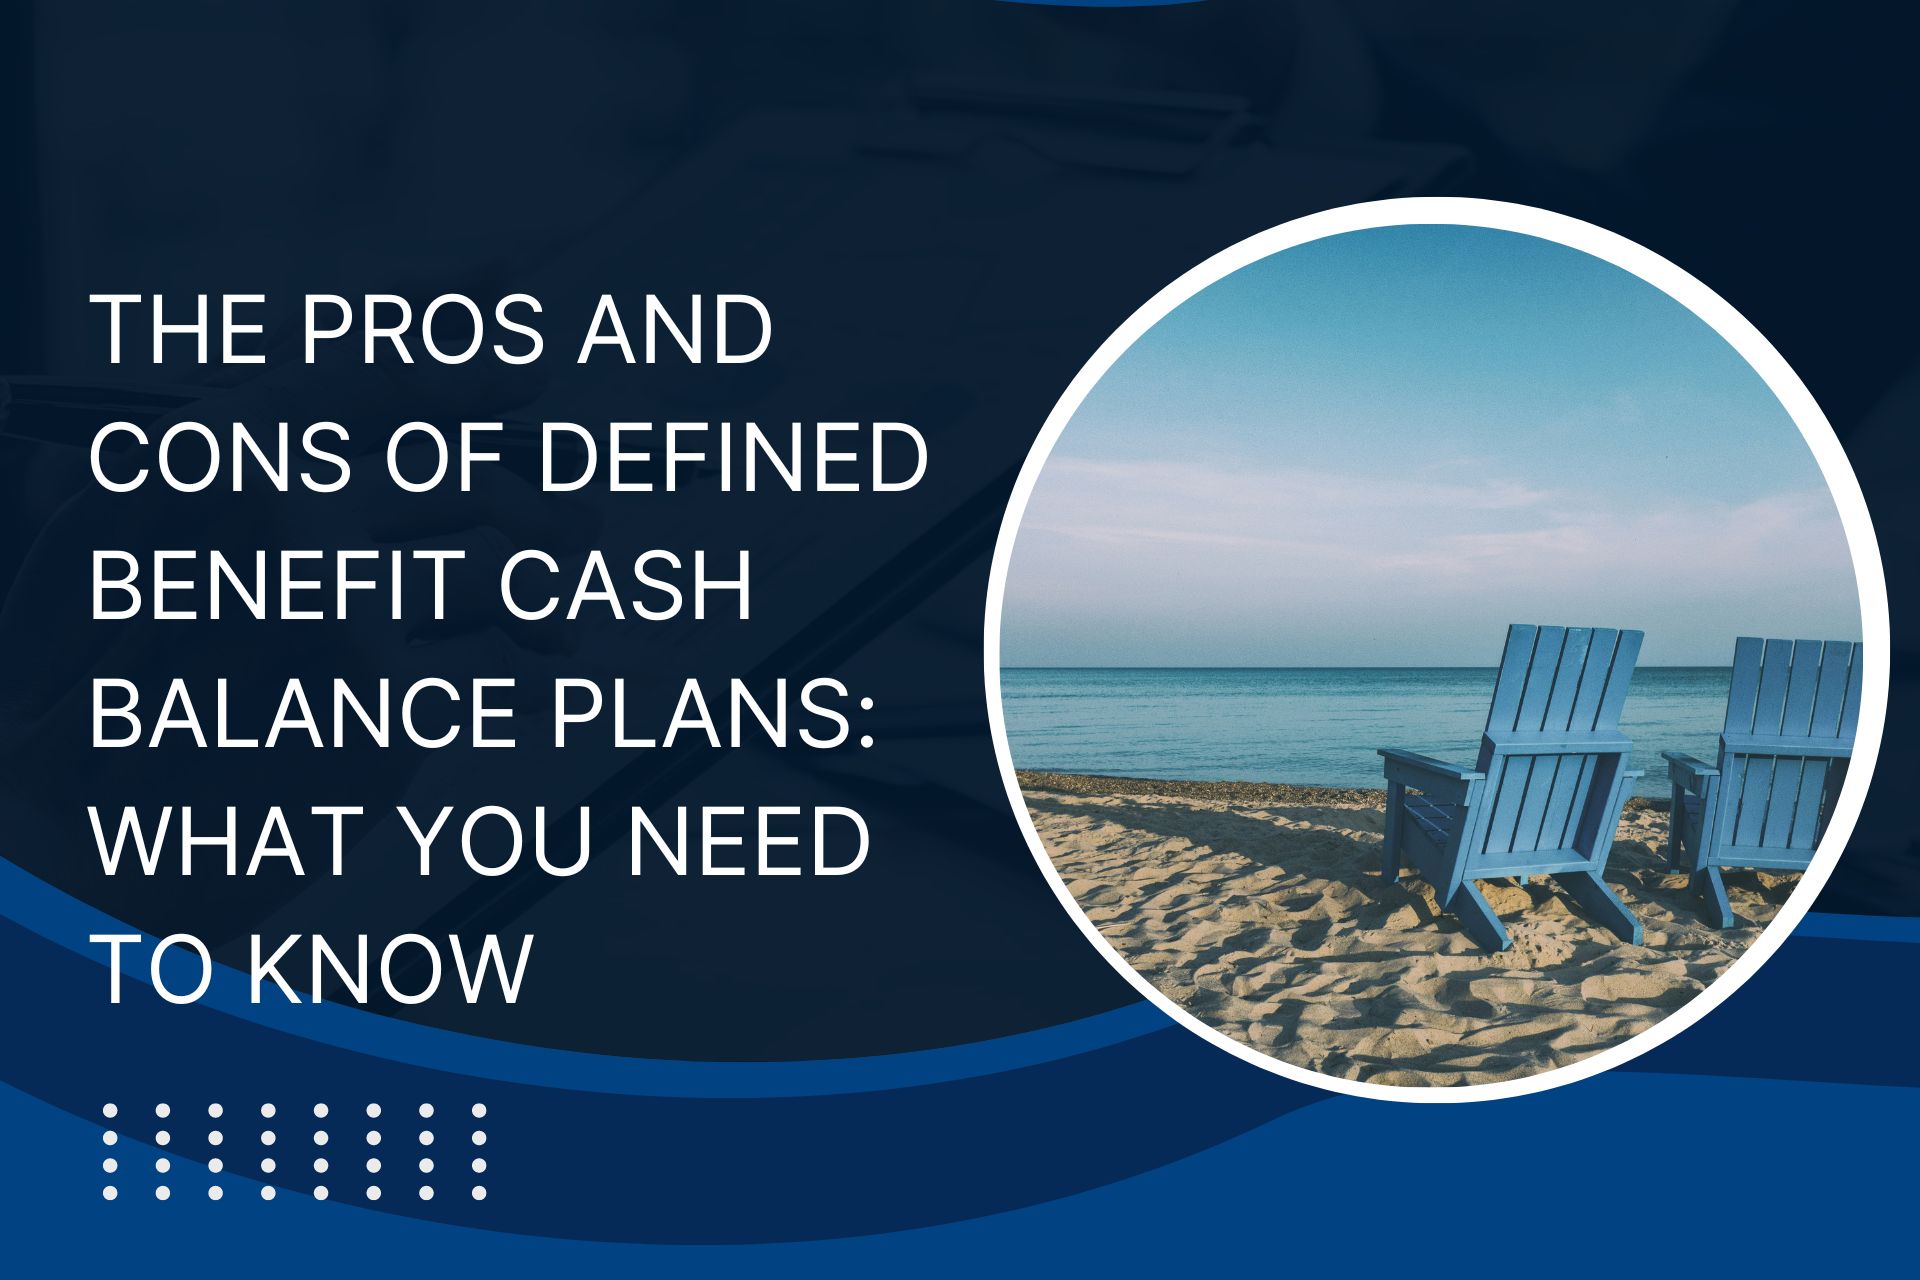 Pros and Cons of Defined Benefit Cash Balance Plans